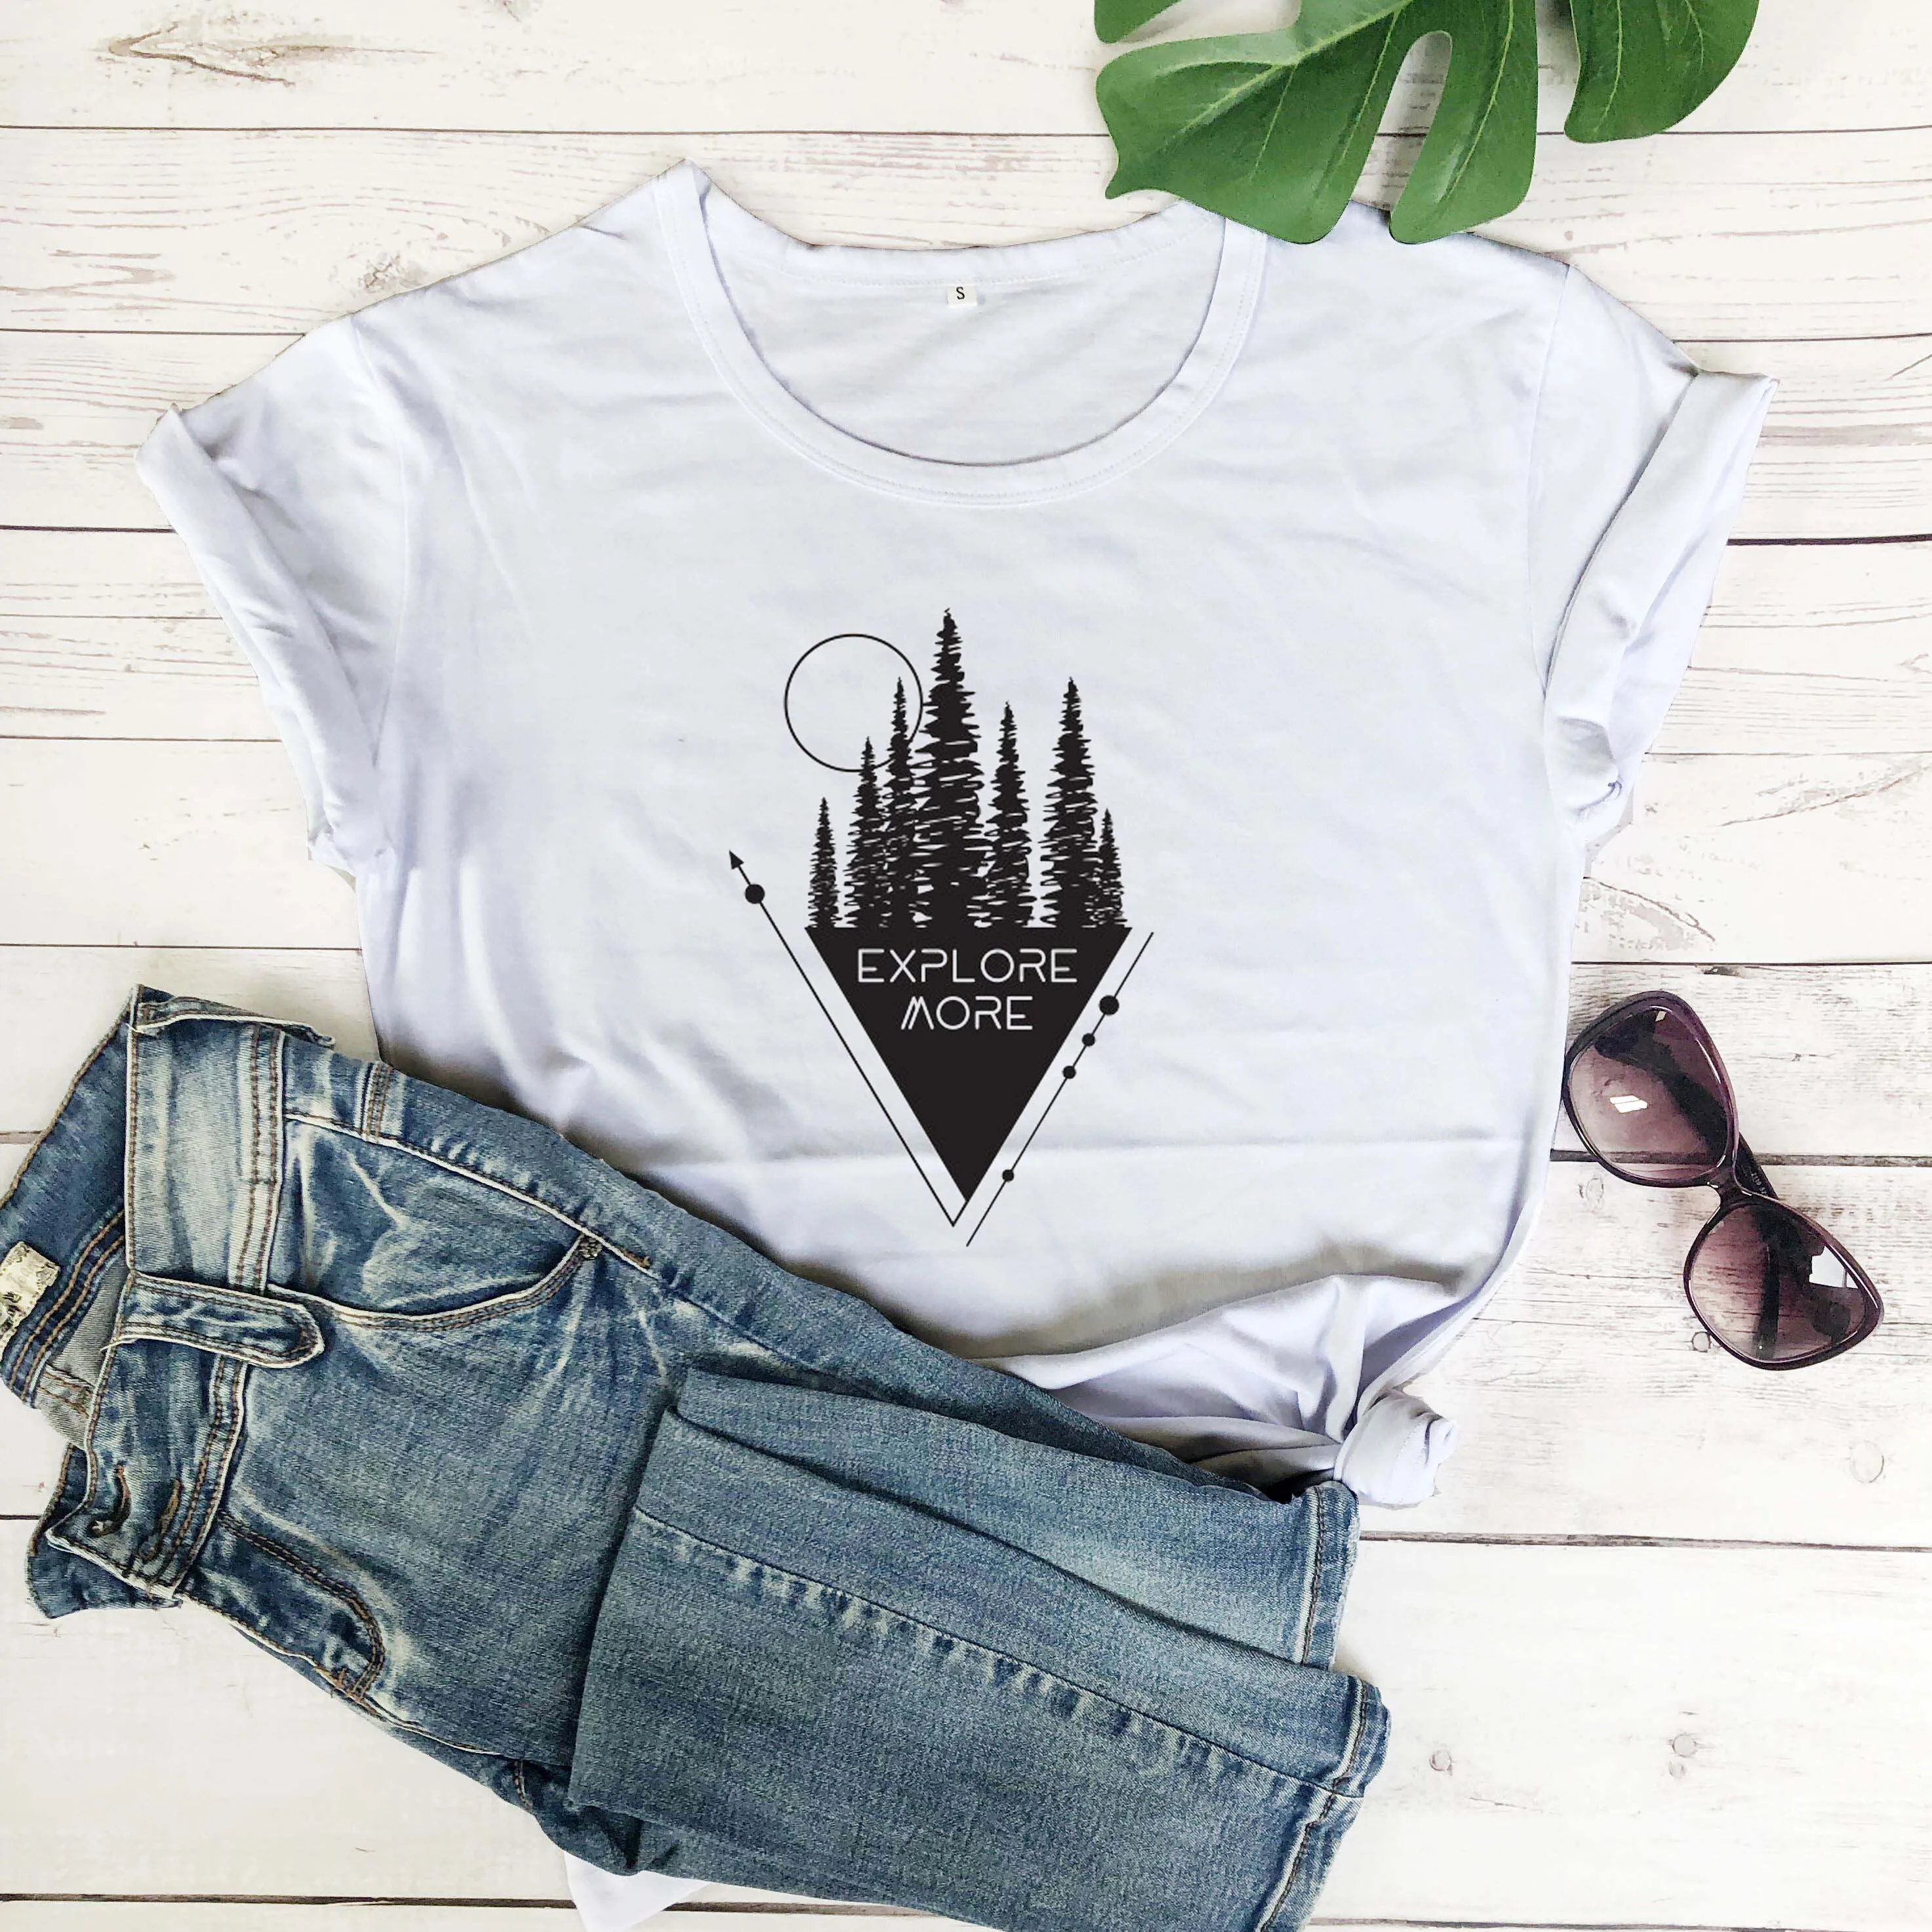 

Adventure Wild Life t shirt graphic women fashion unisex travel funny slogan grunge tumblr cute gothic gift tees youngs top L549